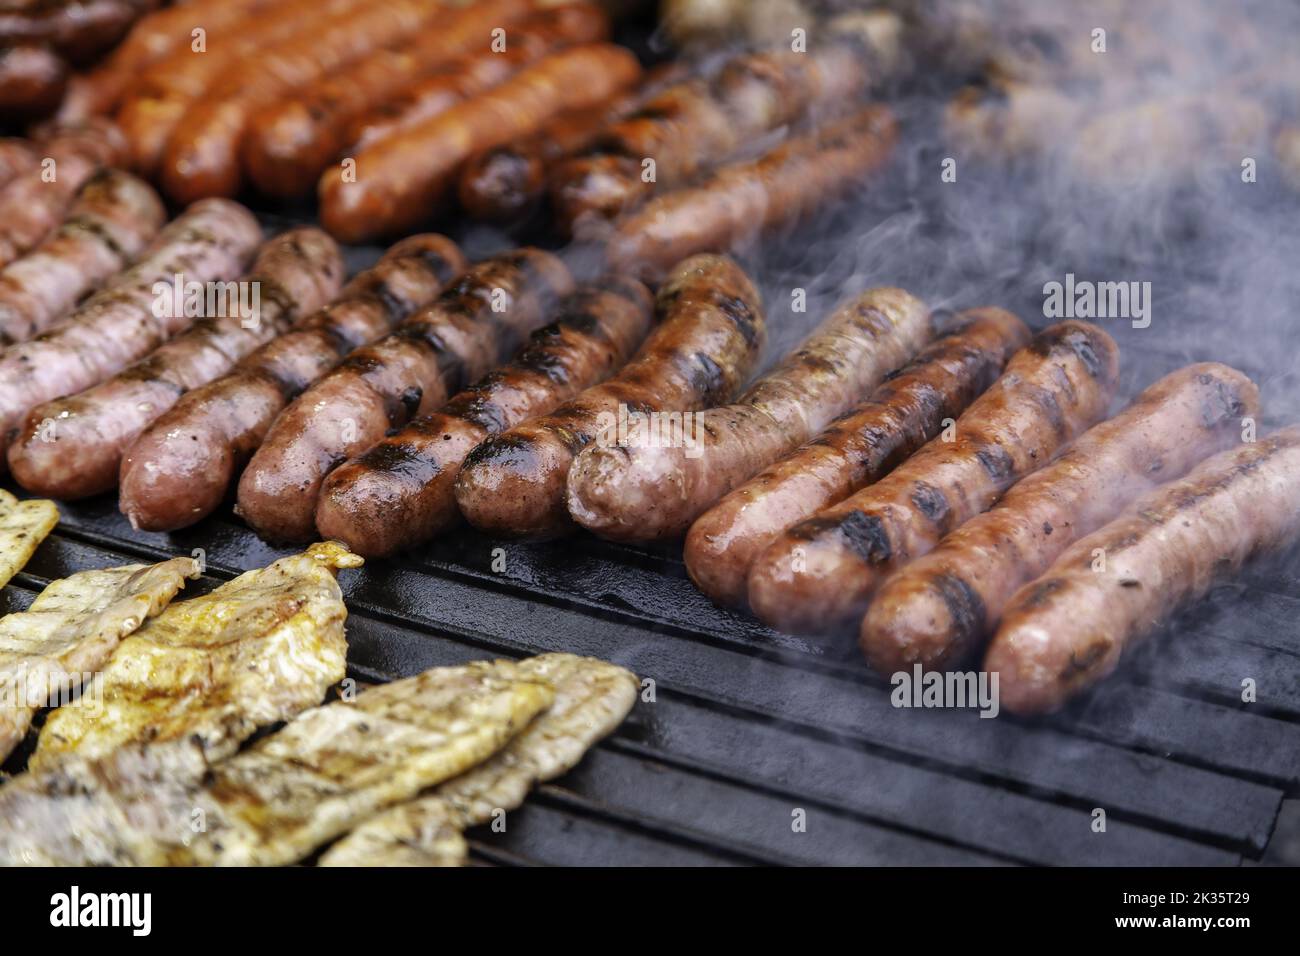 Detail of sausage pork meat cooked over fire on a barbecue Stock Photo